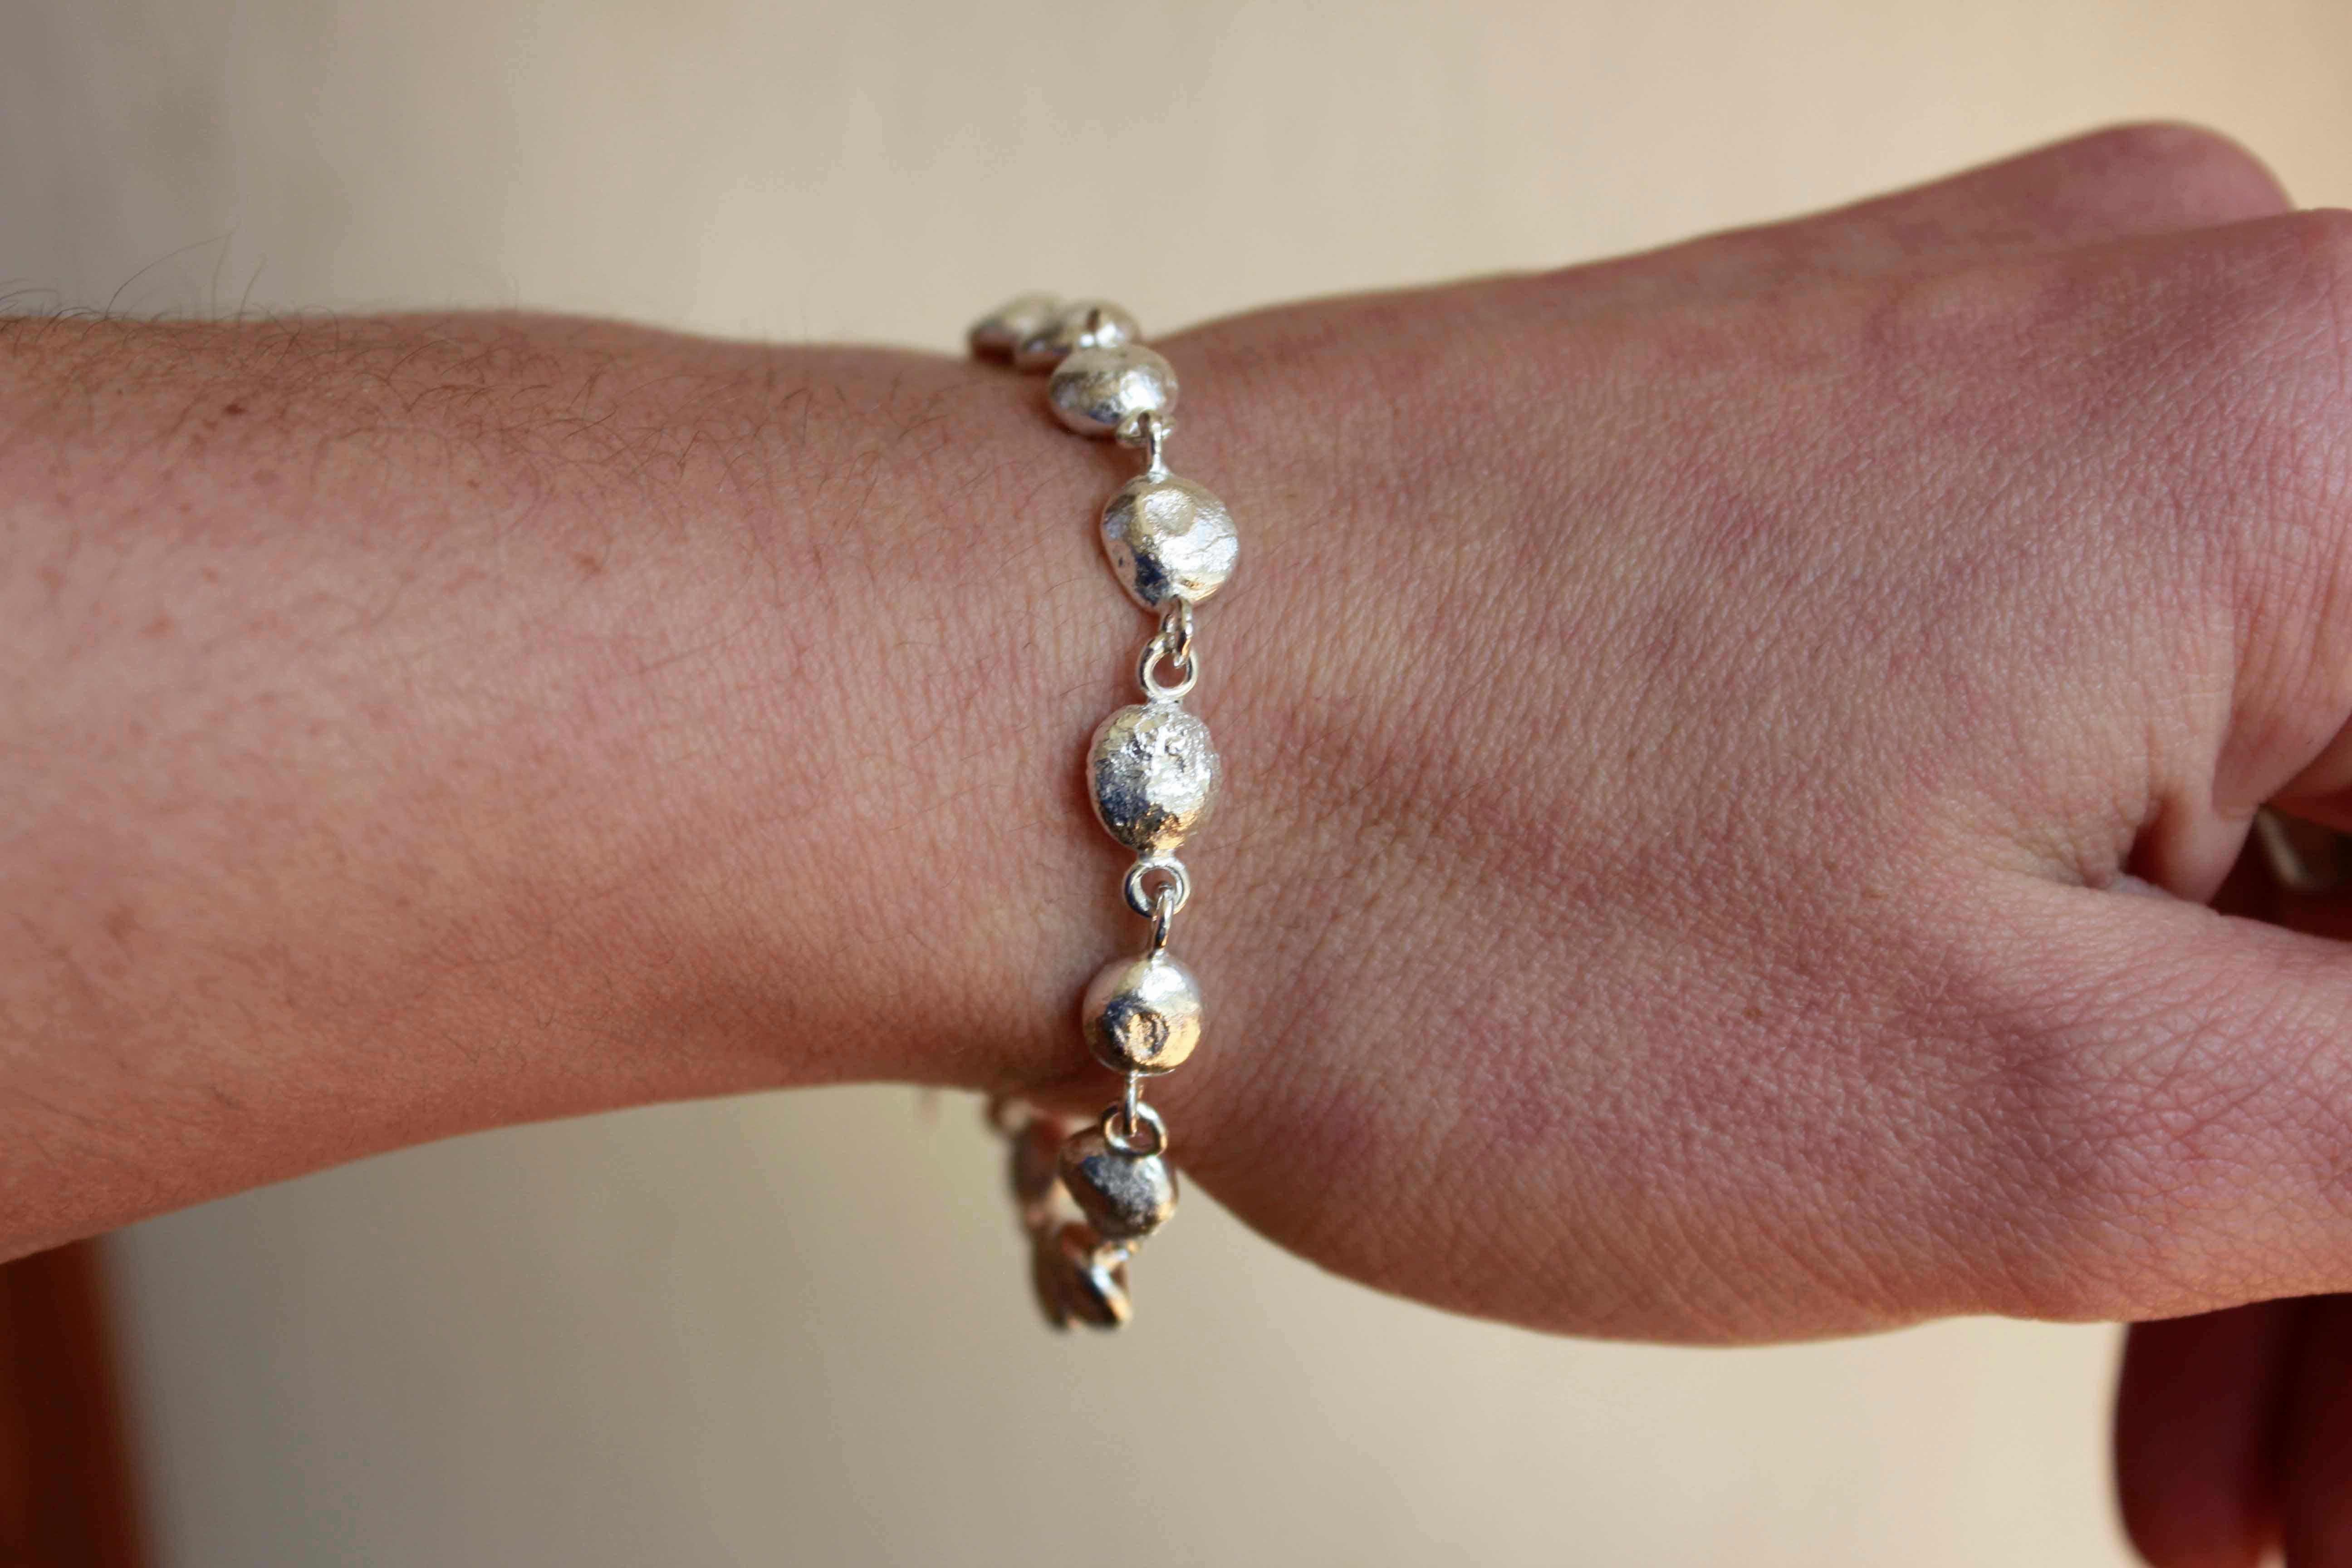 The Gaia Bracelet consists of 13 hand melted silver balls.

The small organic balls are made from our silver scrap, which means they are 100% recycled and solid.

The bracelet has 18 – 21cm length.

Each ball has approximately 0.8cm width and 0.5cm